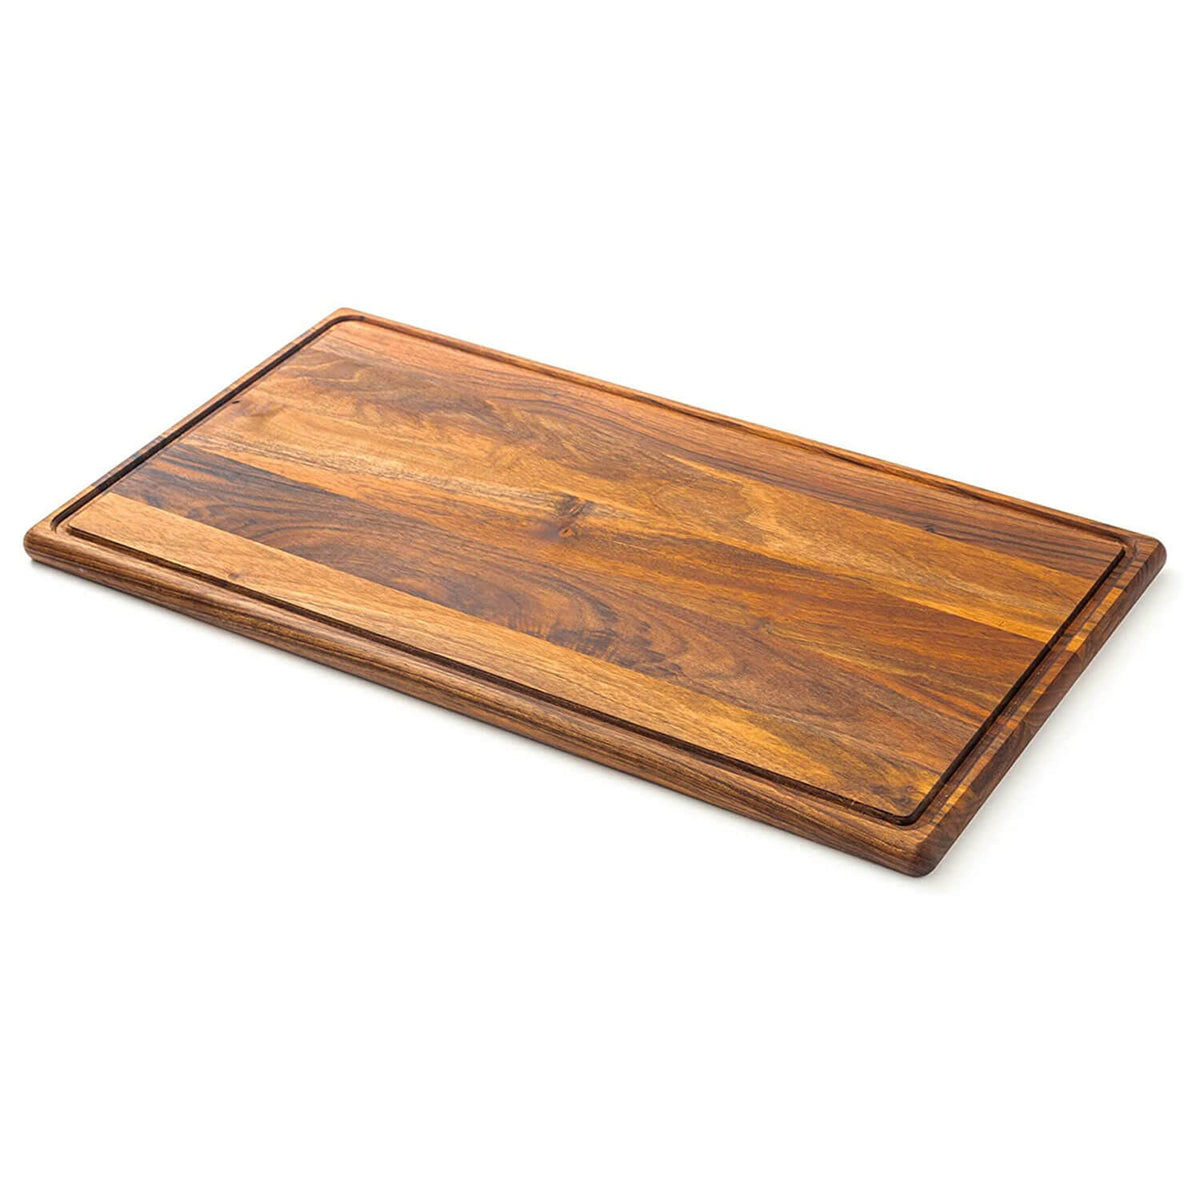 https://tuuli-shop.com/cdn/shop/products/large-wooden-cutting-board-serving-from-walnut-44-x-30-2-cm-tuuli-kitchen-786.jpg?crop=center&height=1200&v=1679340424&width=1200